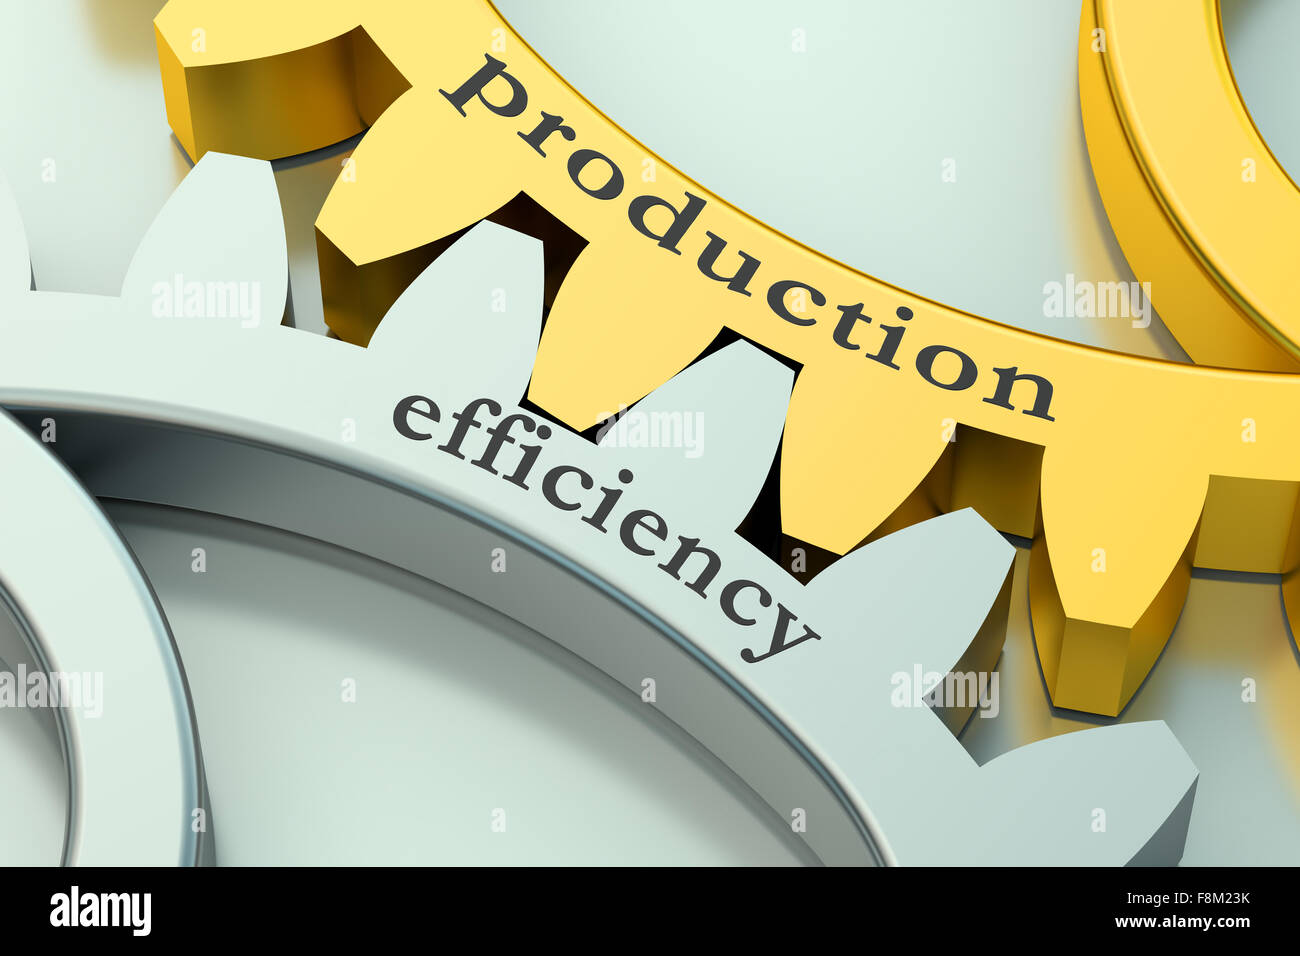 production and efficiency concept on the gear Stock Photo